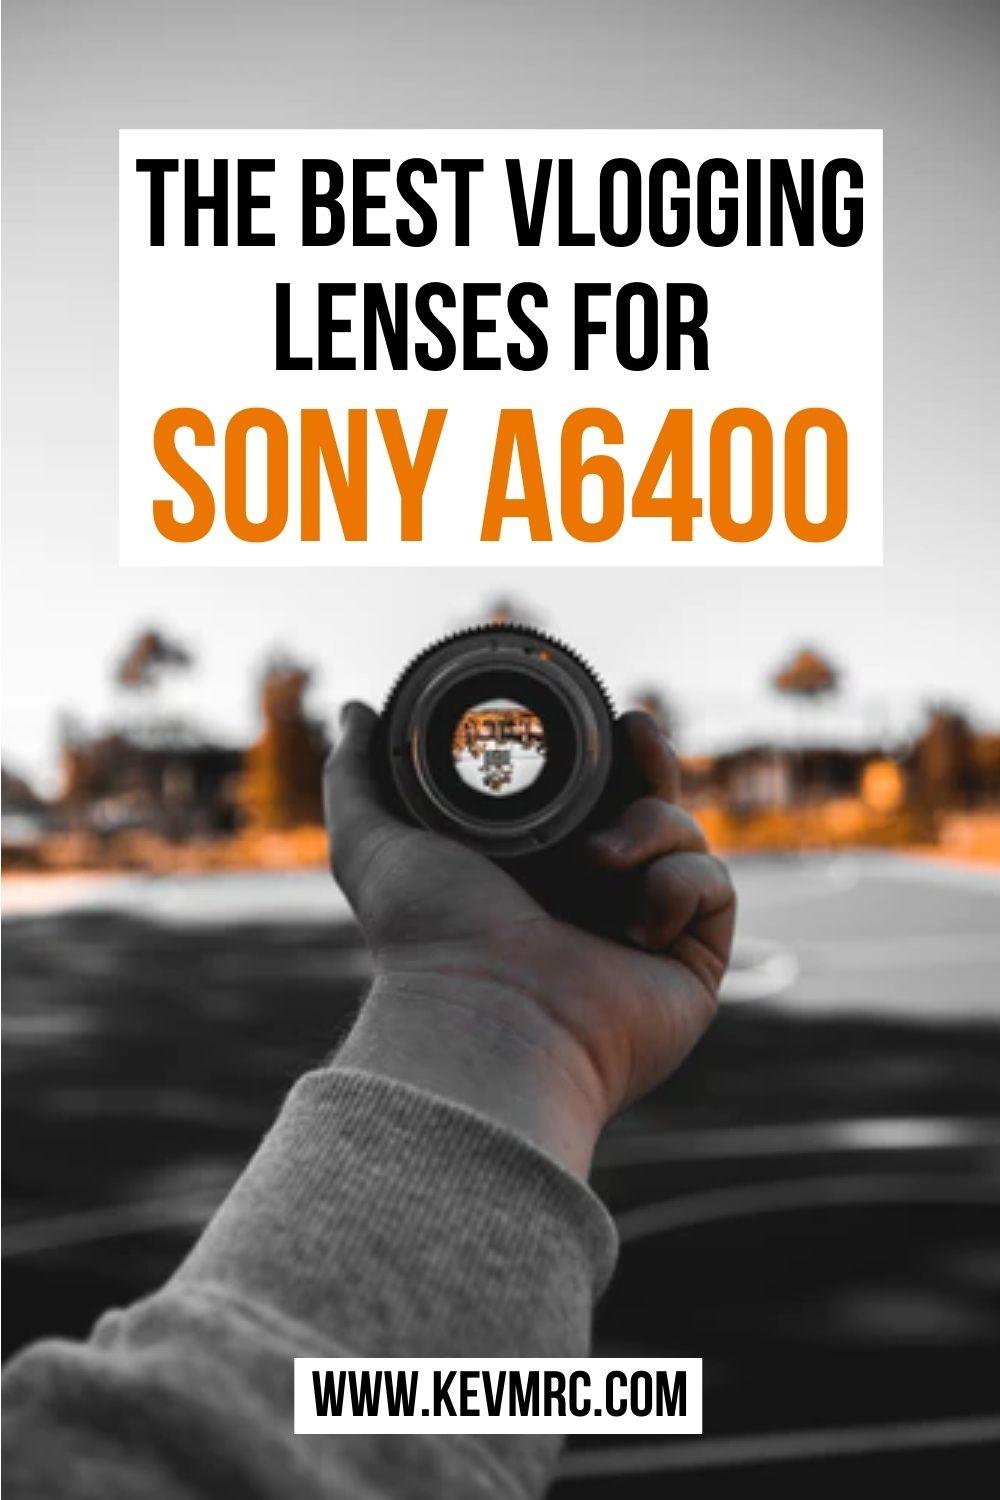 Find the best vlogging lens for Sony A6400. camera lens guide | photo guide | best sony lenses | photography gear 